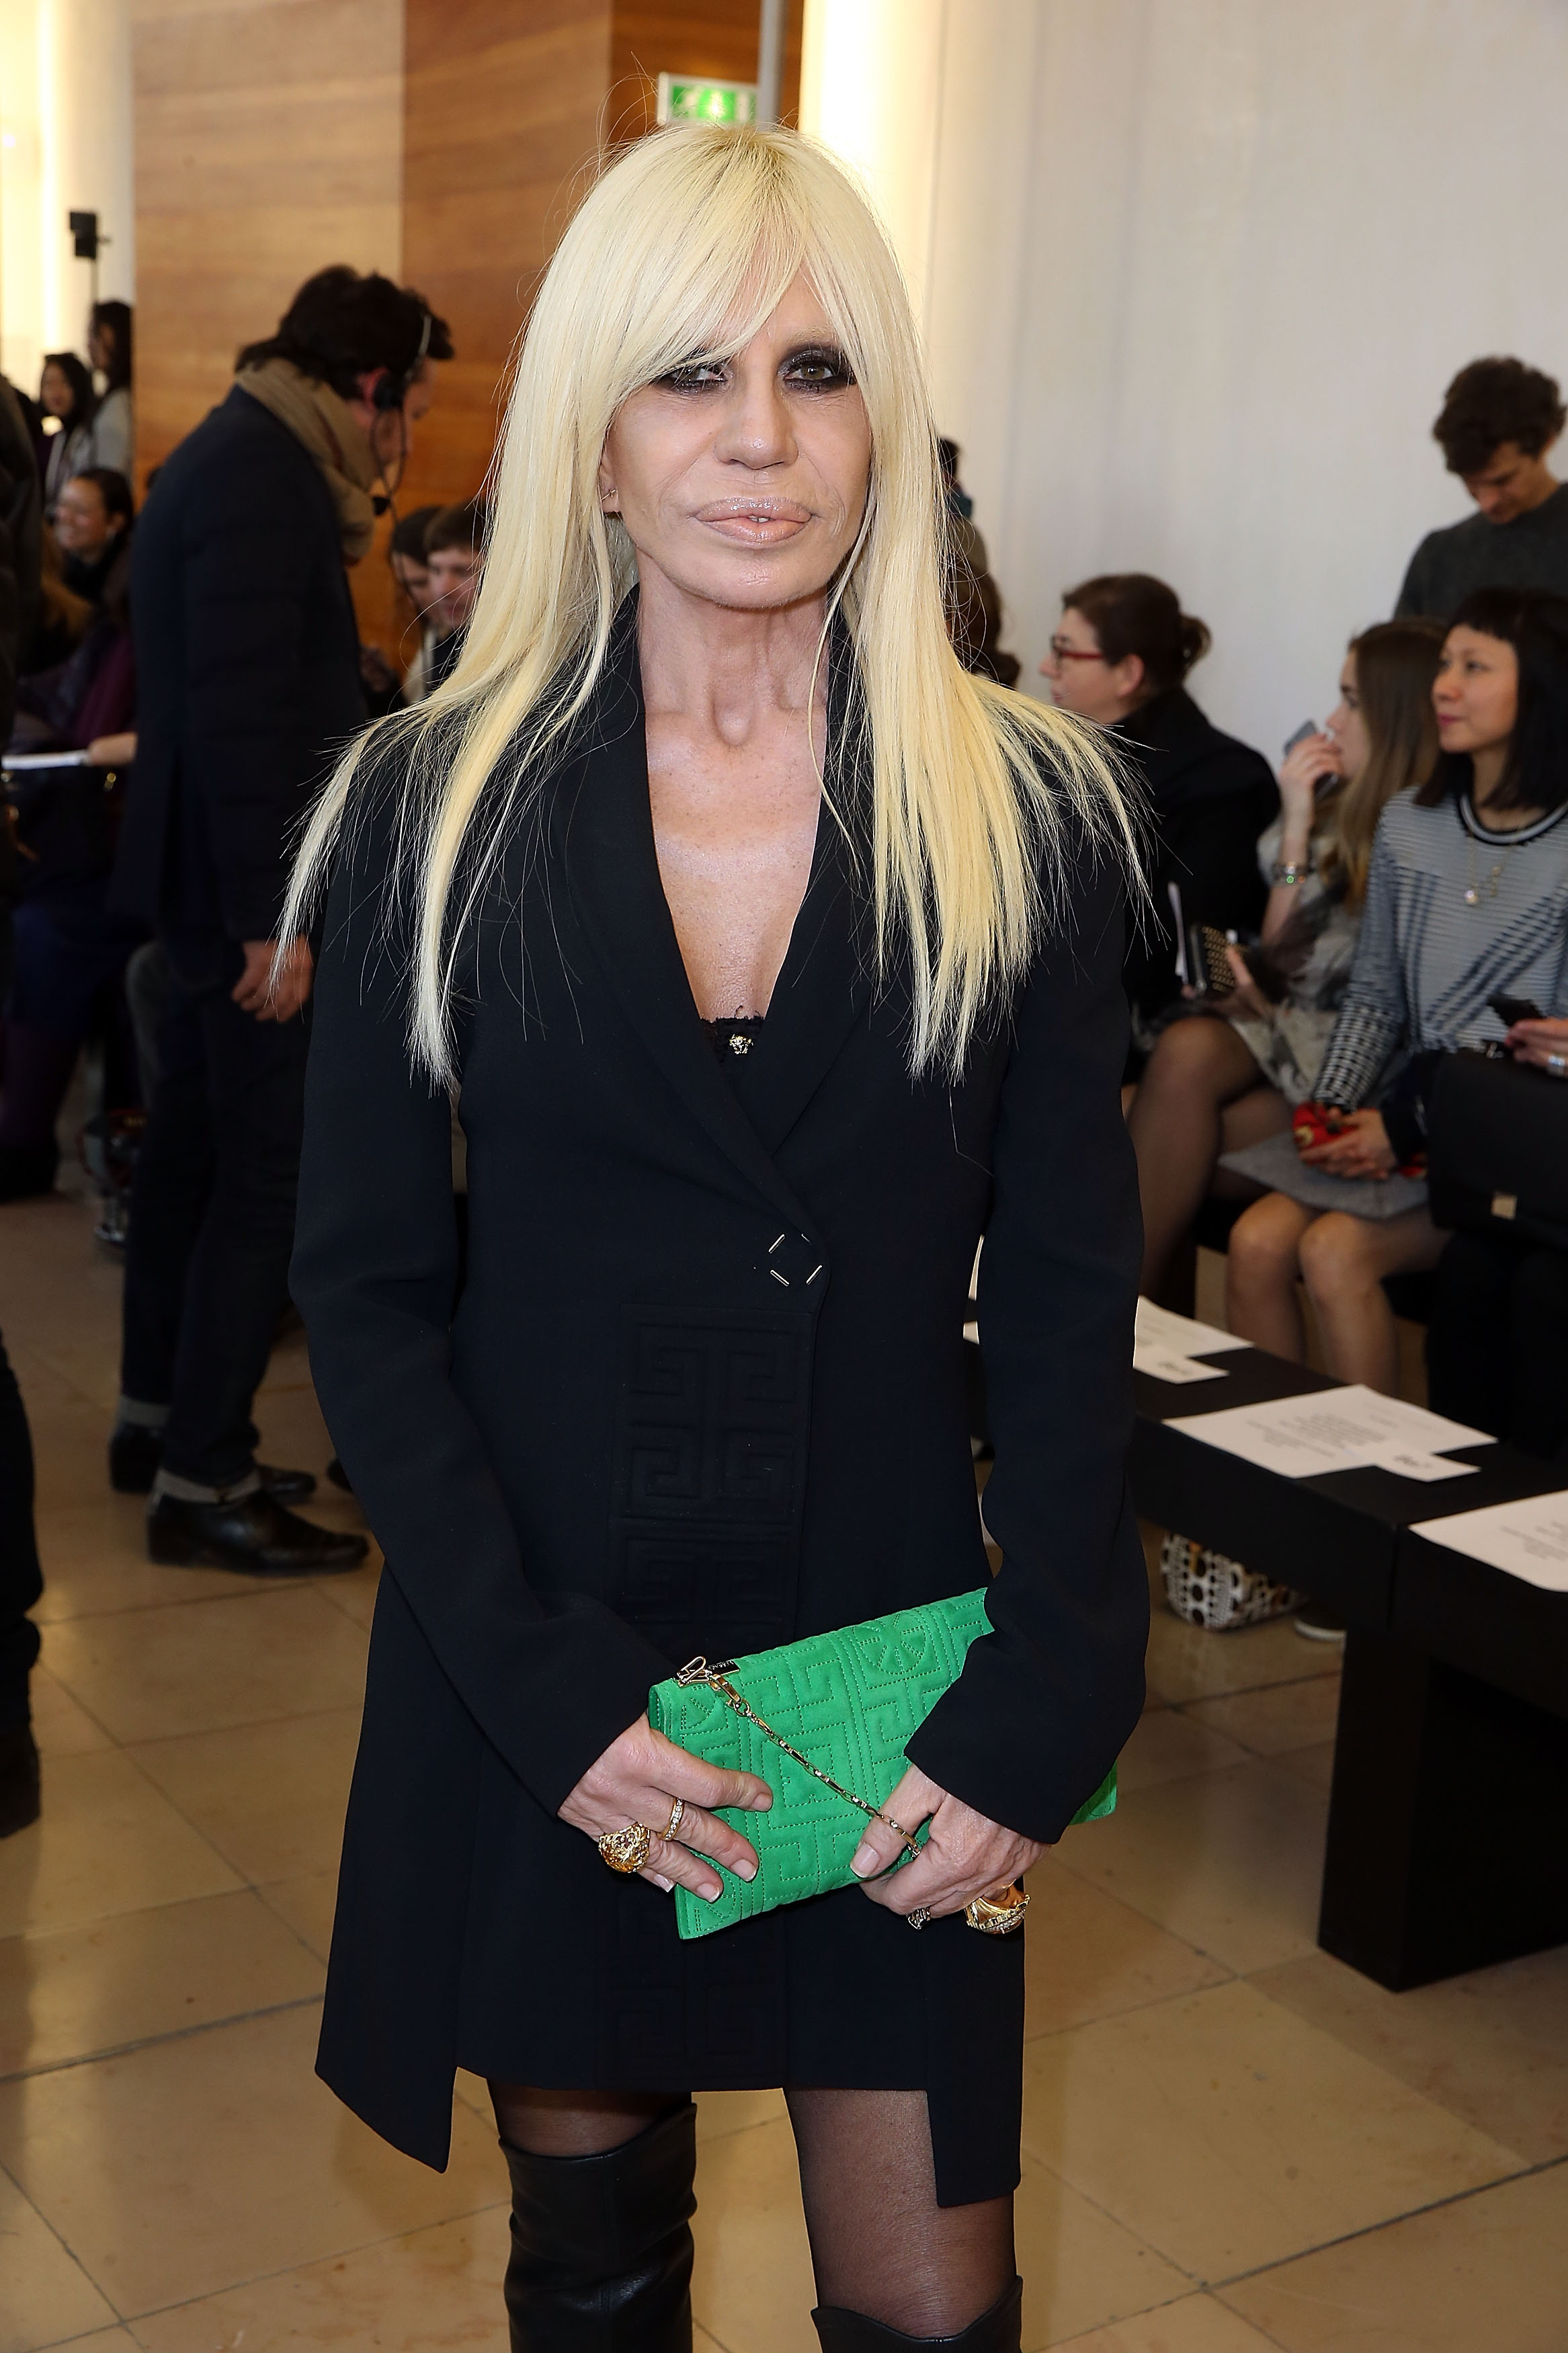 <p>Compared to how she looked back in 1990, when Donatella Versace attended the Anthony Vaccarello presentation during Paris Fashion Week in 2015, it was clear that she'd had a lot of work done over the years. "I'm not like this genetically," she admitted two years earlier, though she attributed her altered appearance to using "tons of cream." She's also fessed up to getting Botox.</p>